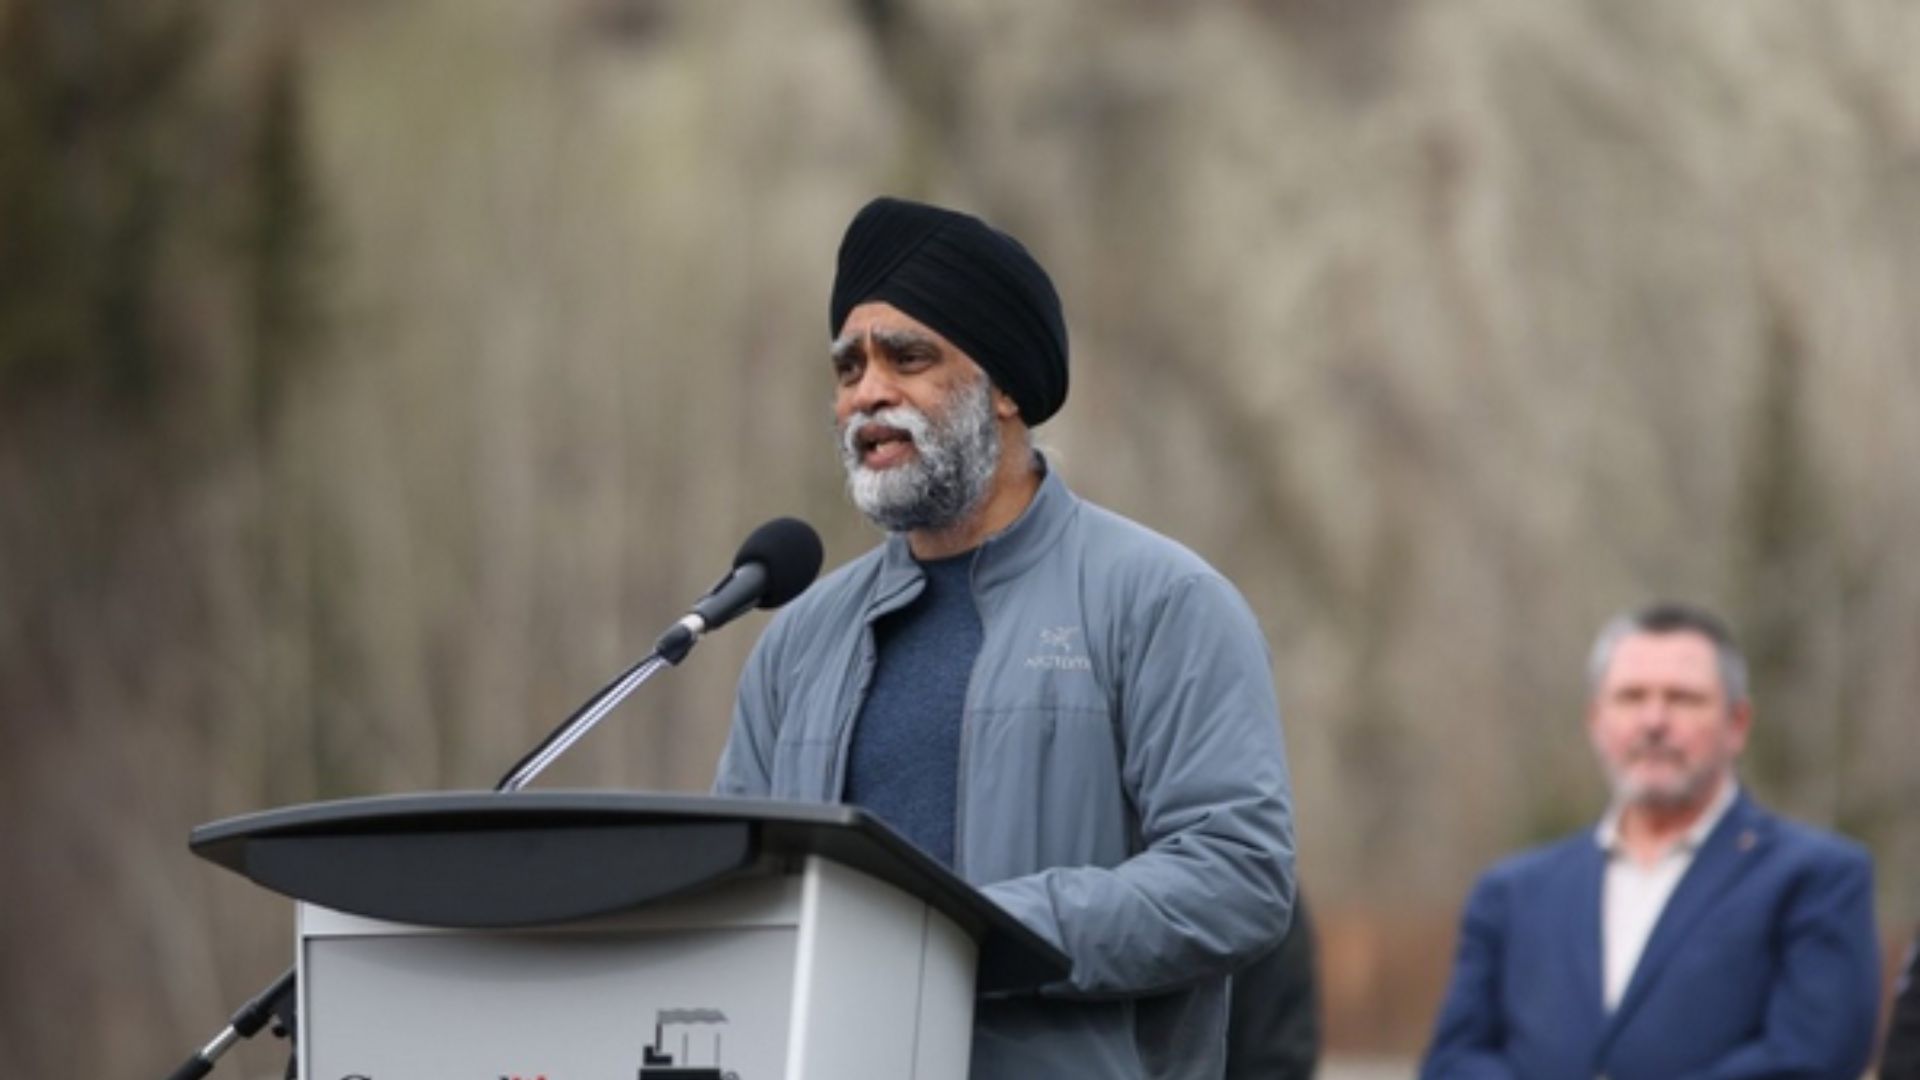 Canada Former Minister Refutes Report Claiming Trudeau Forced To Accept Meeting About Sikh Activists